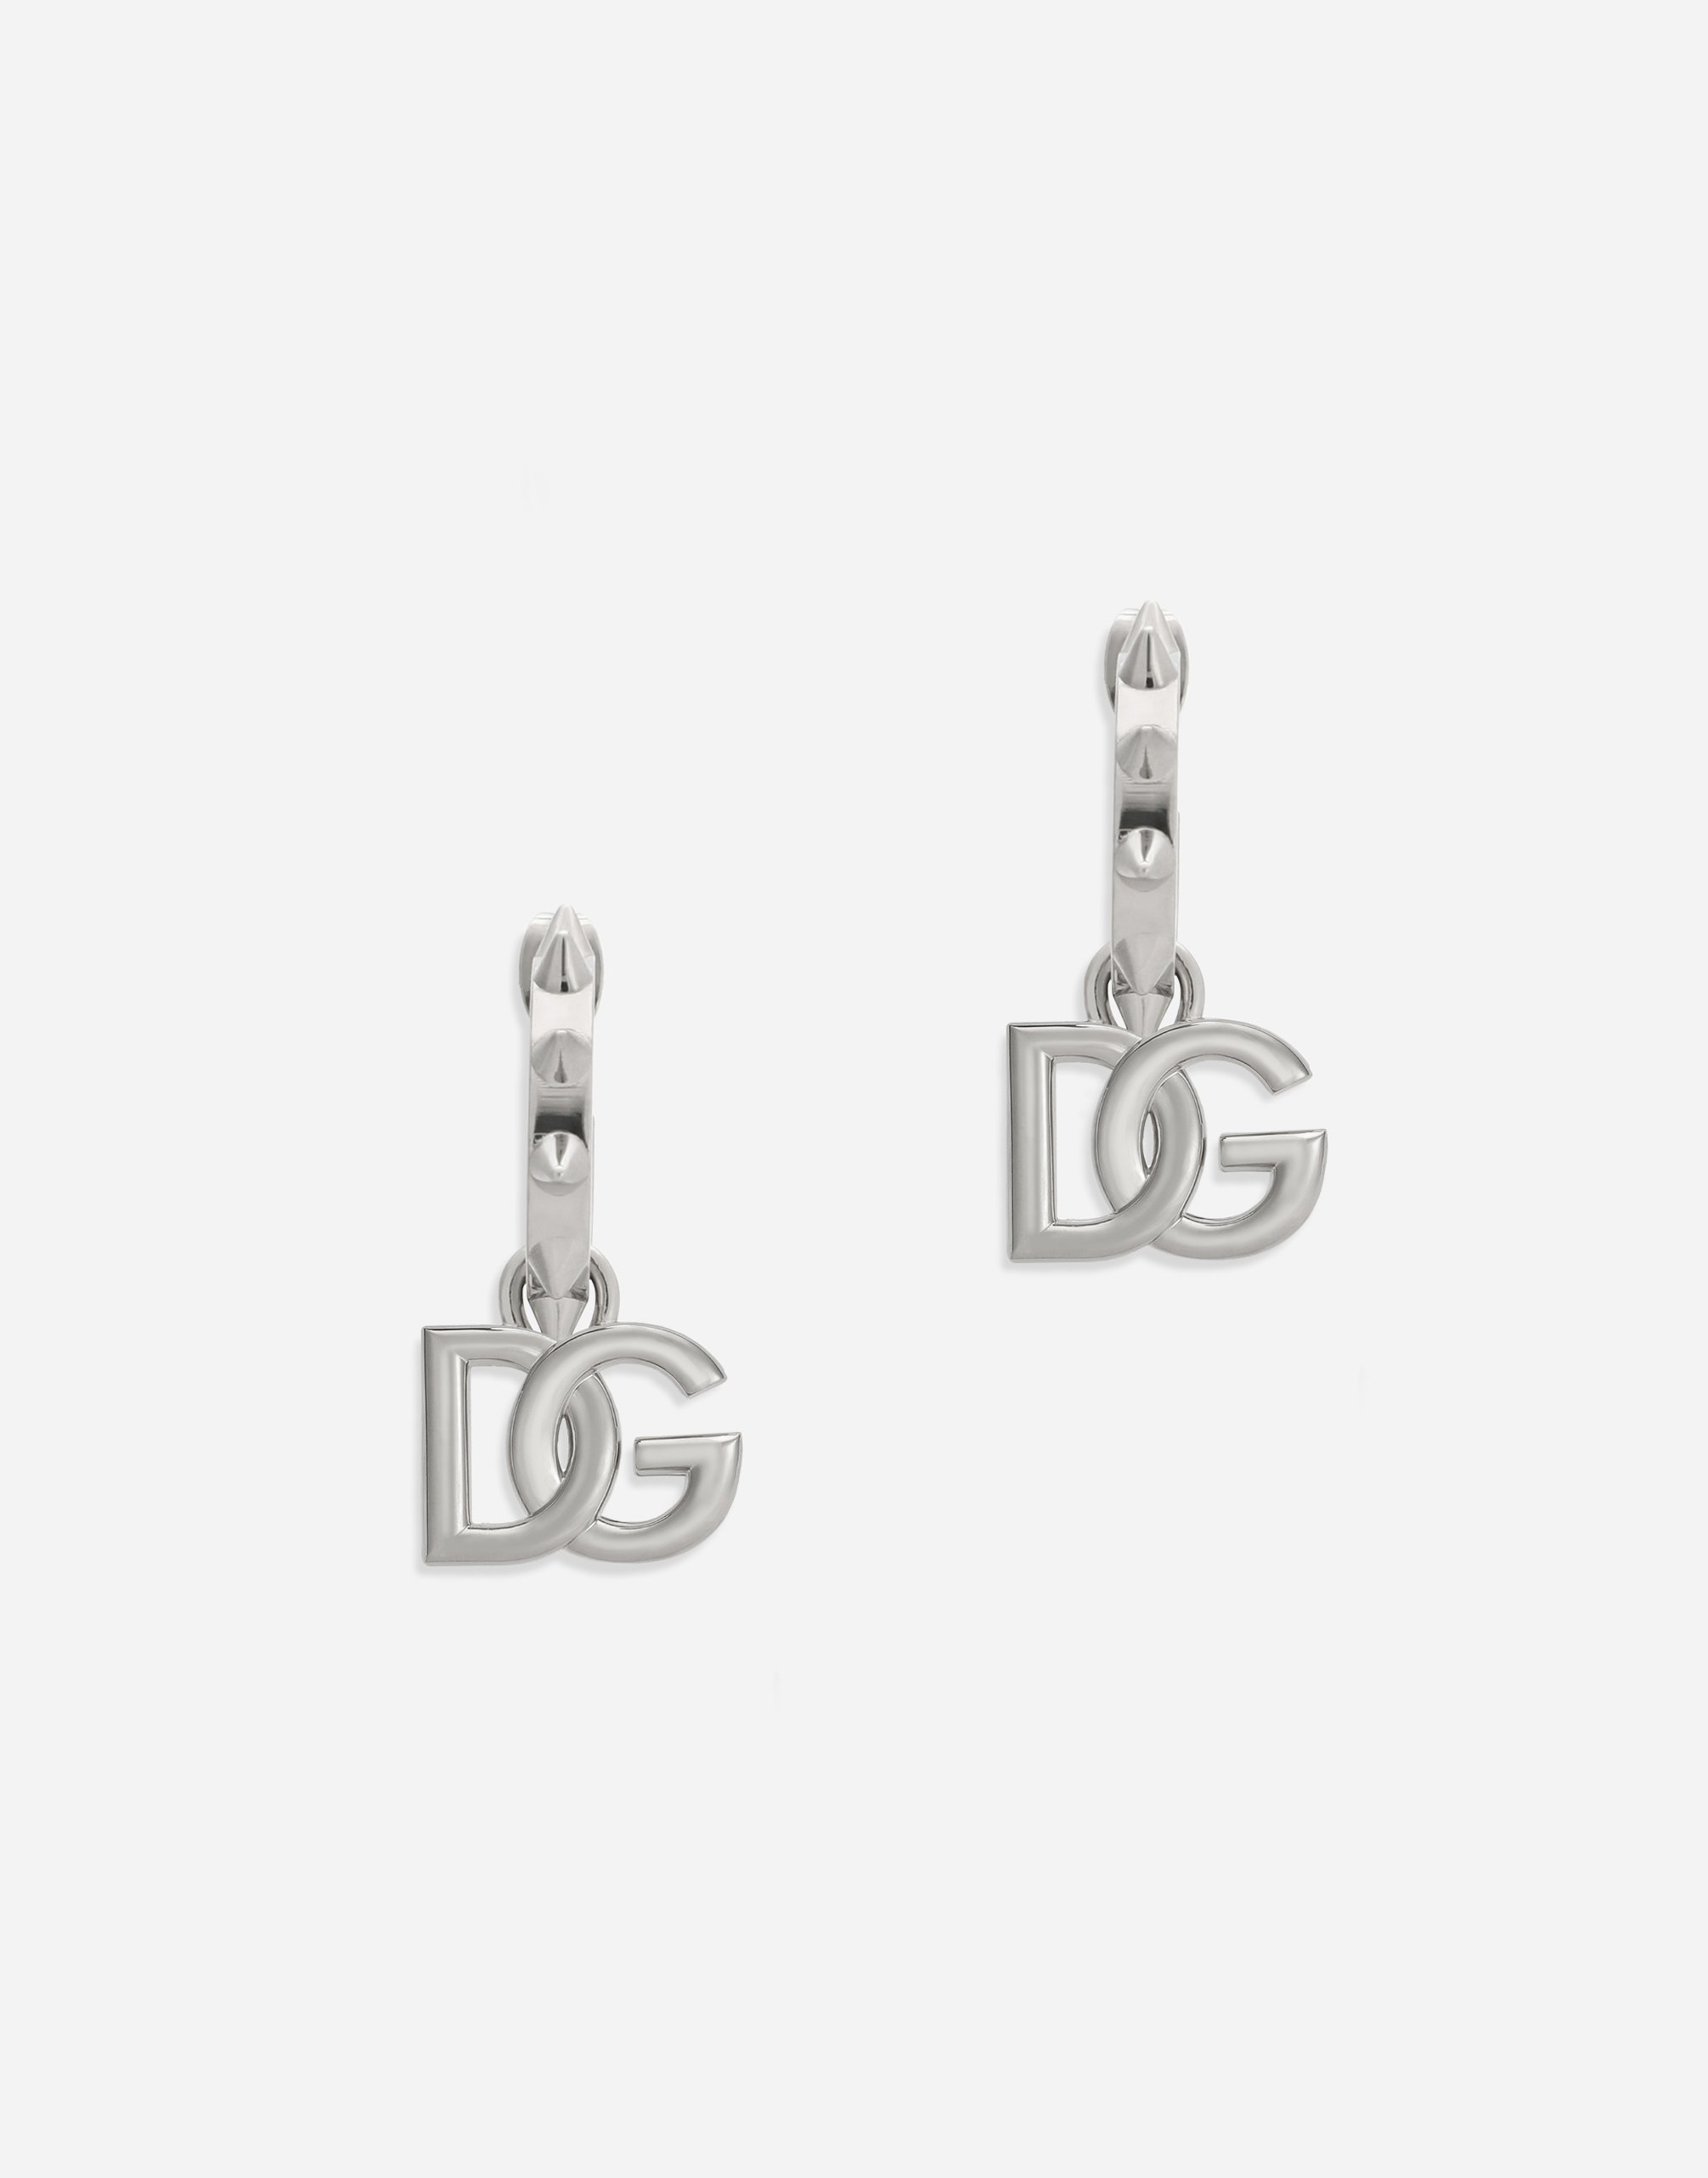 DG logo earrings with stud embellishment and butterfly backs in Silver